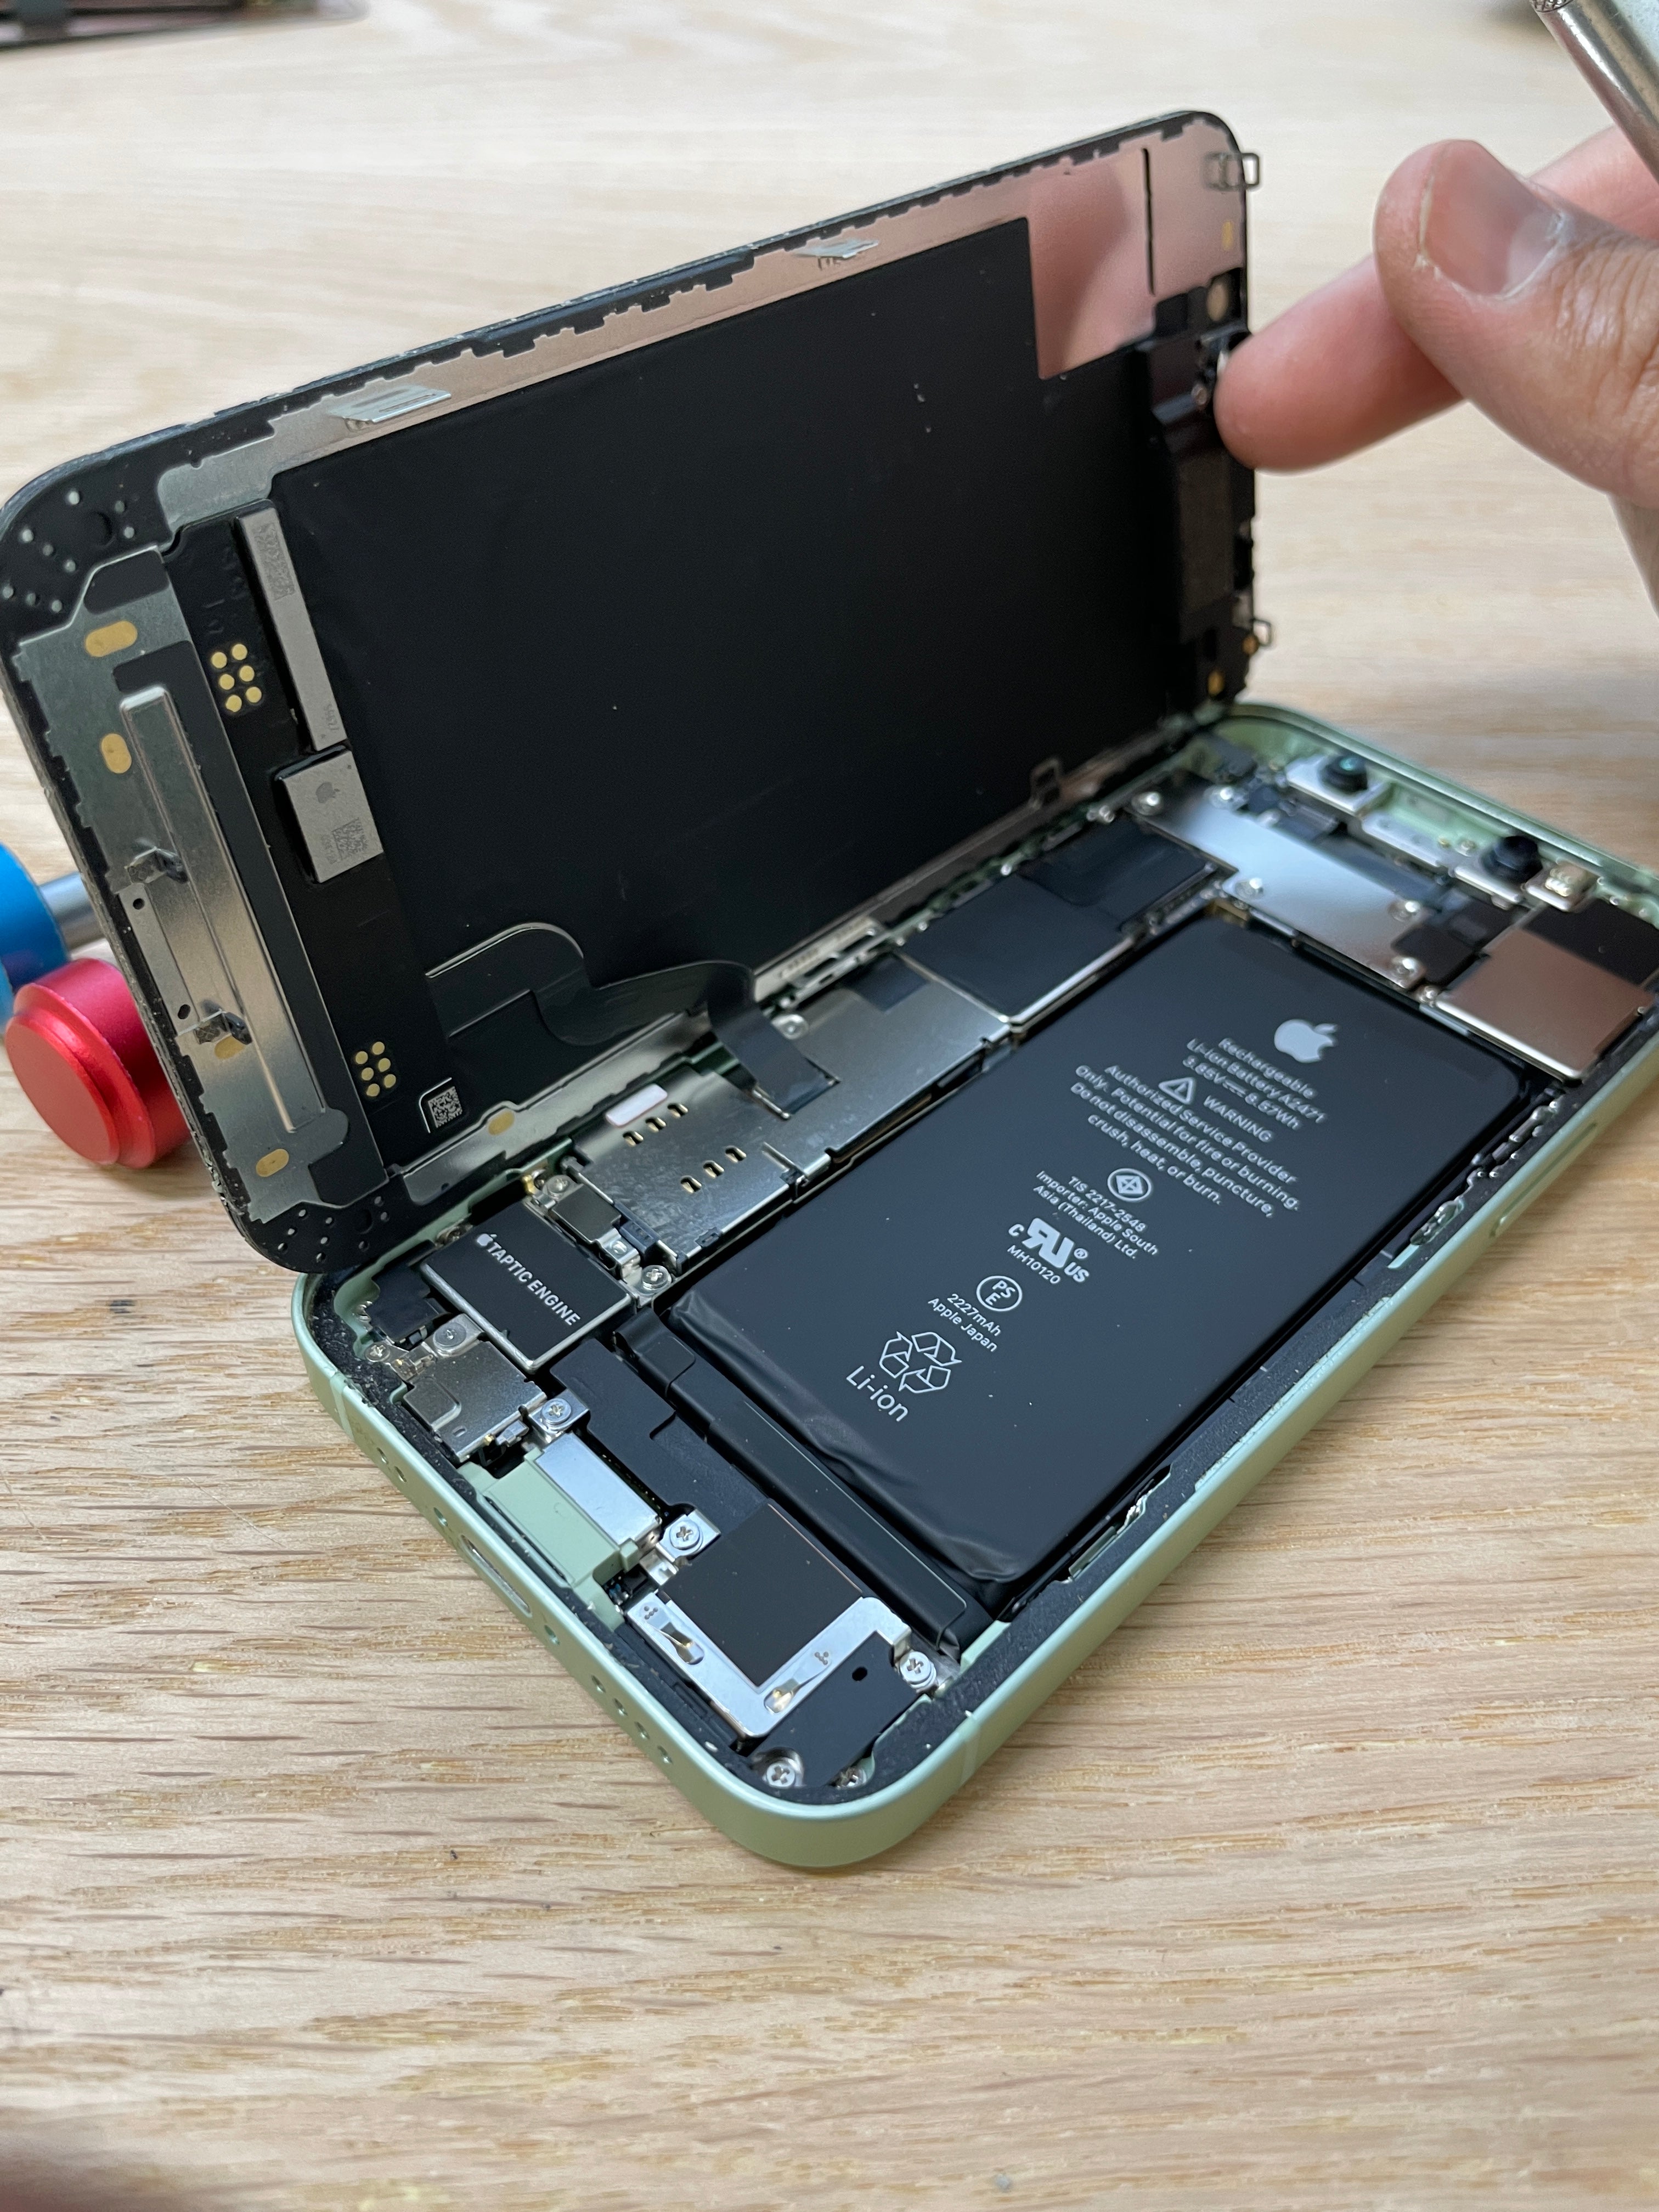 How to Check if iPhone is Refurbished or Not